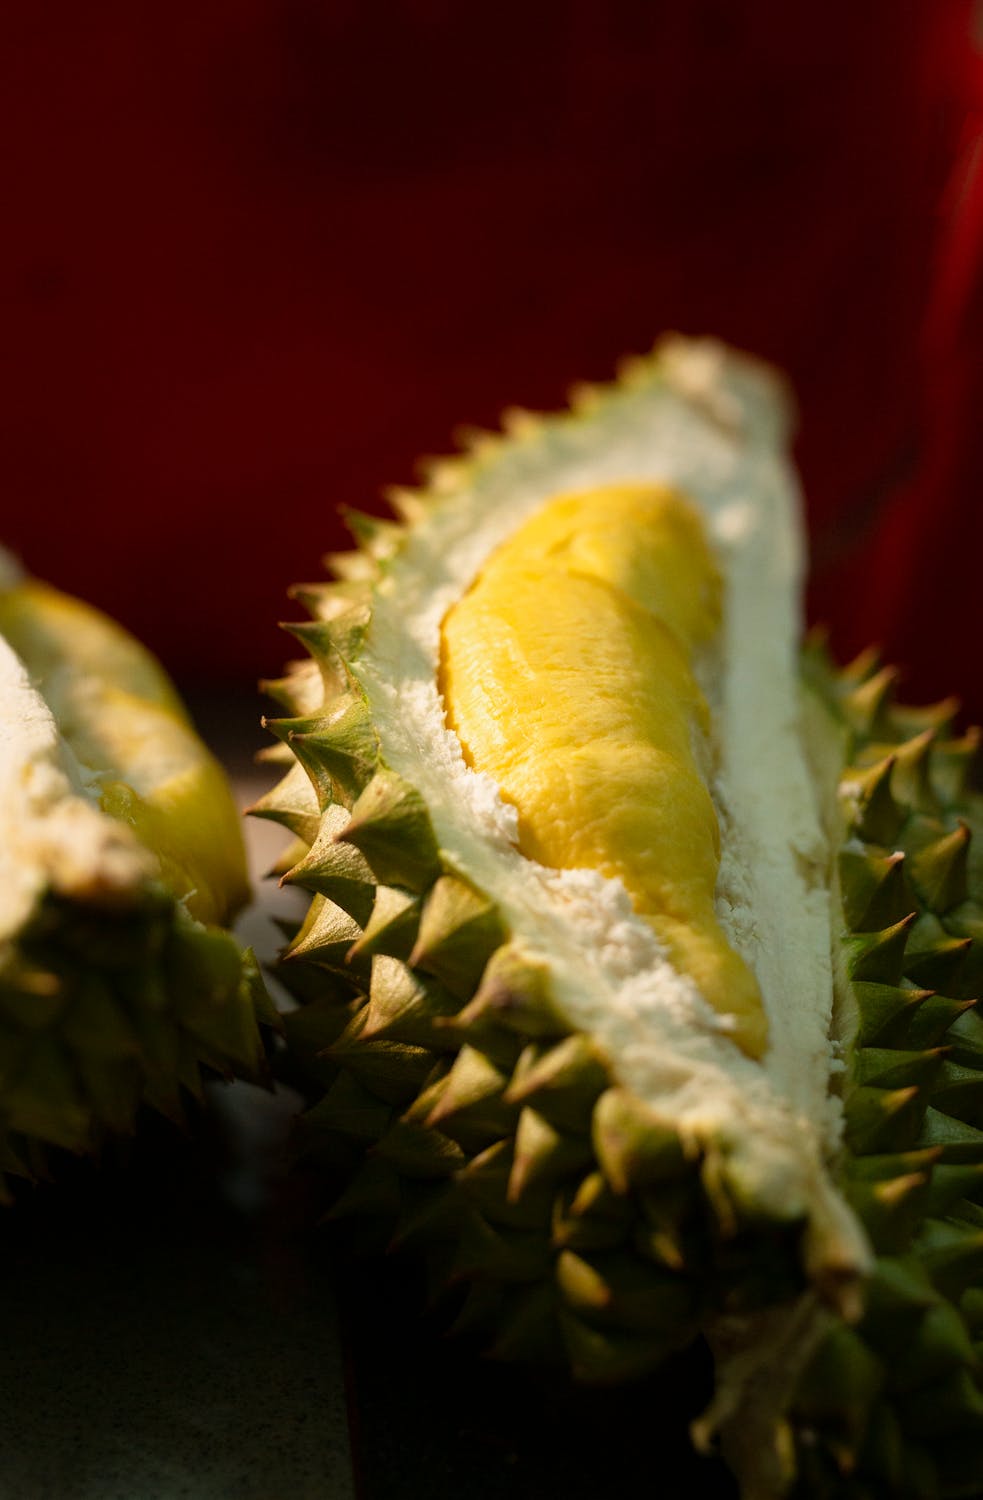 durian cut open to display the yellow flesh